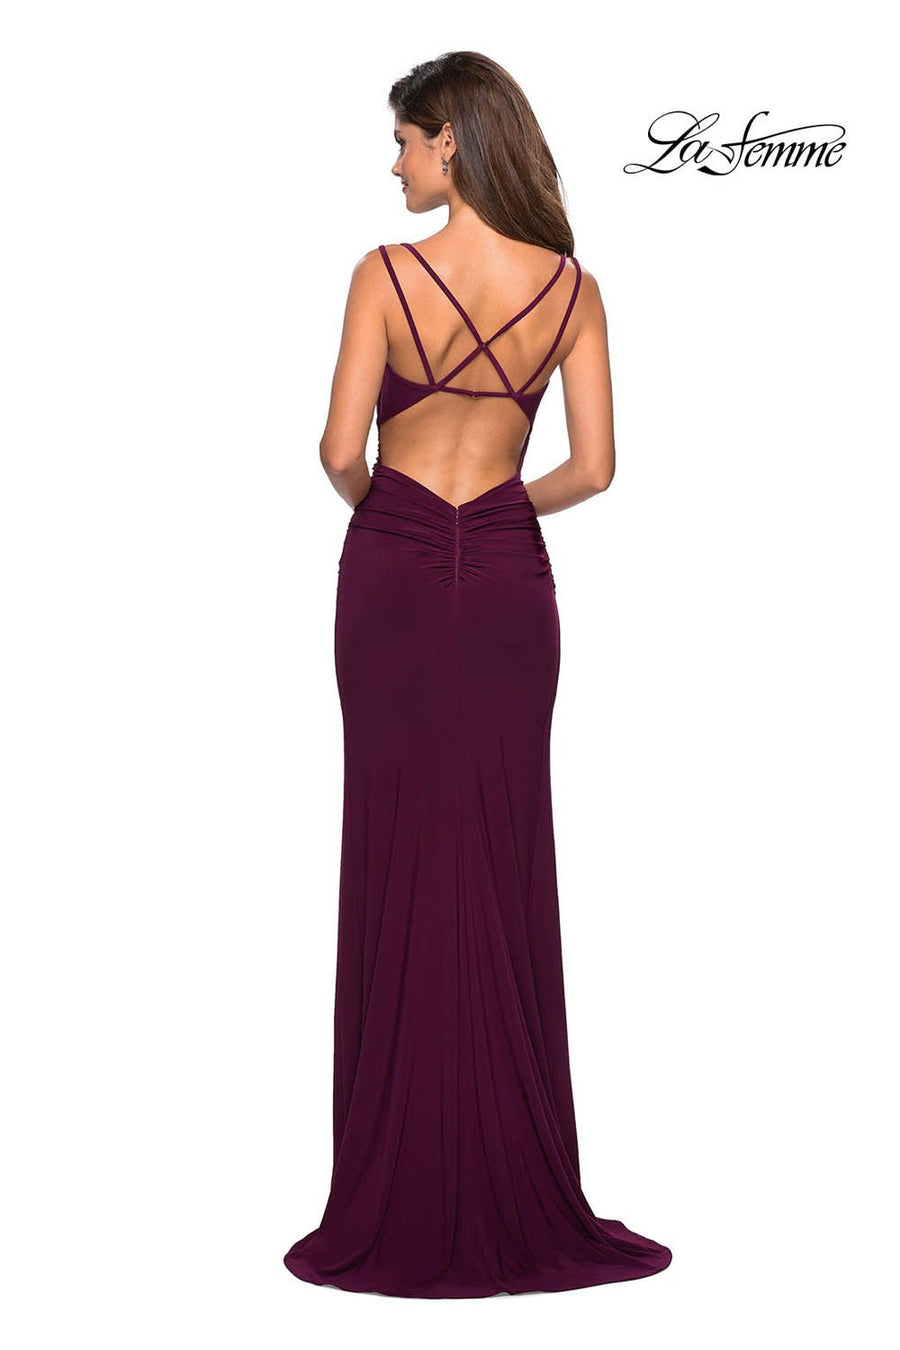 La Femme 27564 prom dress images.  La Femme 27564 is available in these colors: Black, Dark Berry, Red, Royal Blue.